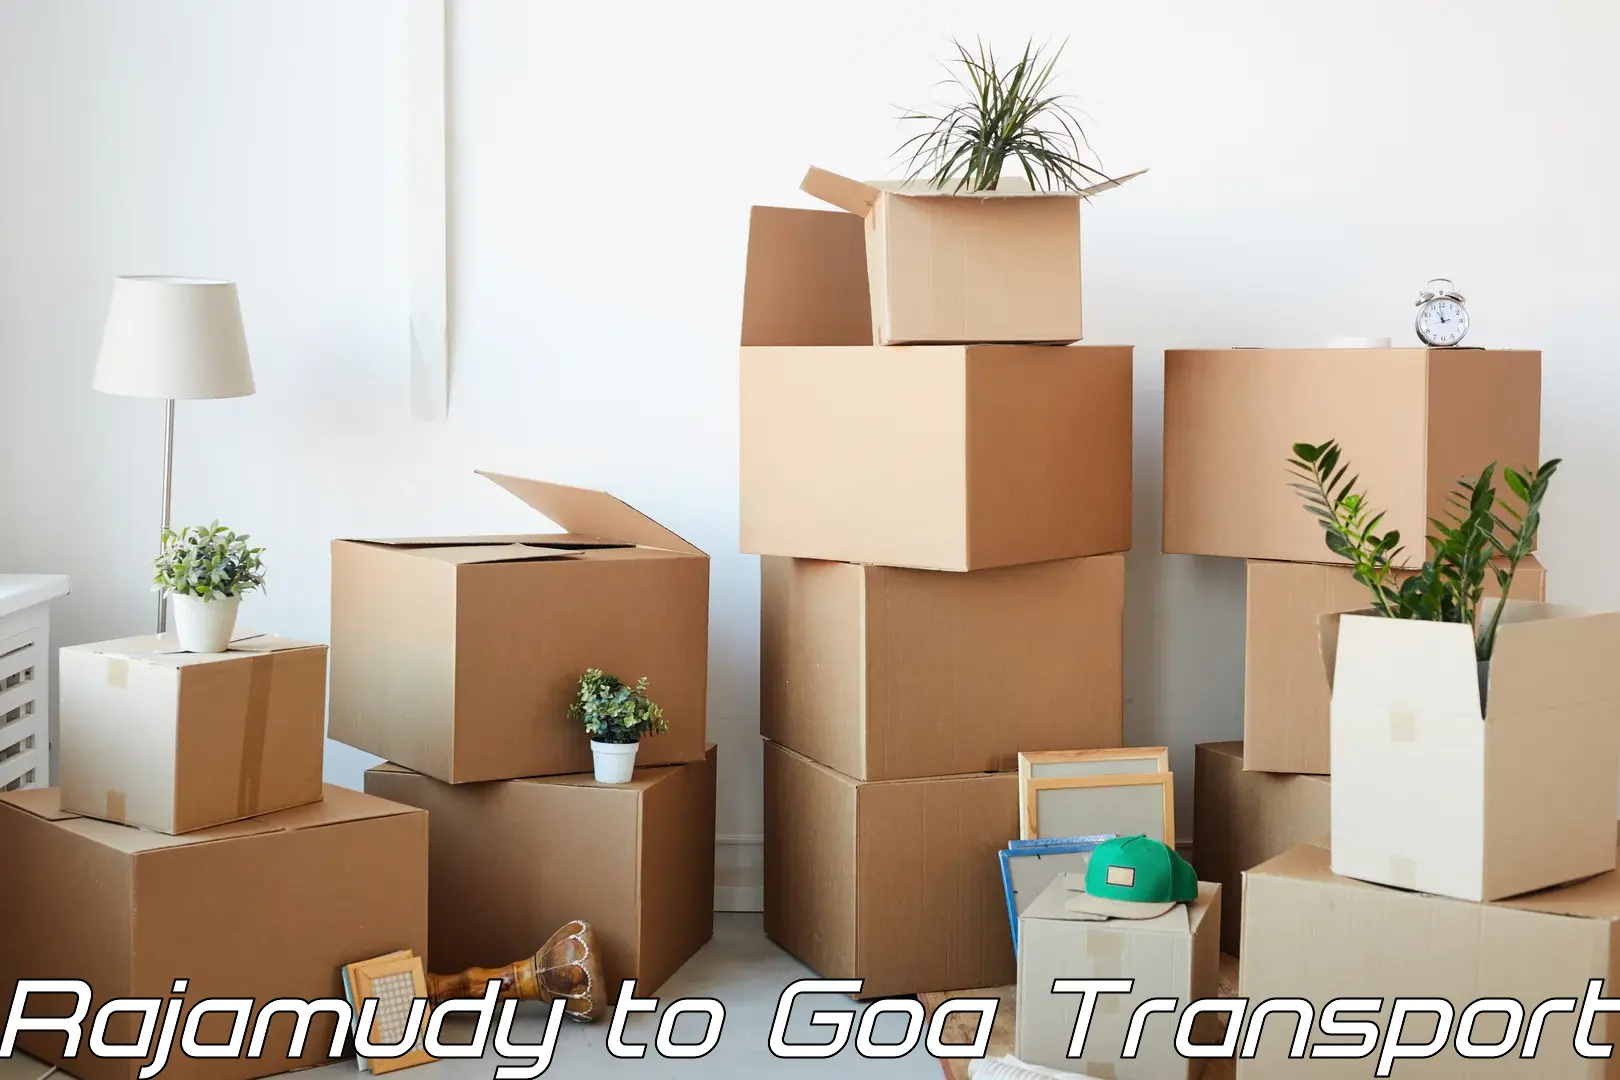 Container transport service in Rajamudy to Goa